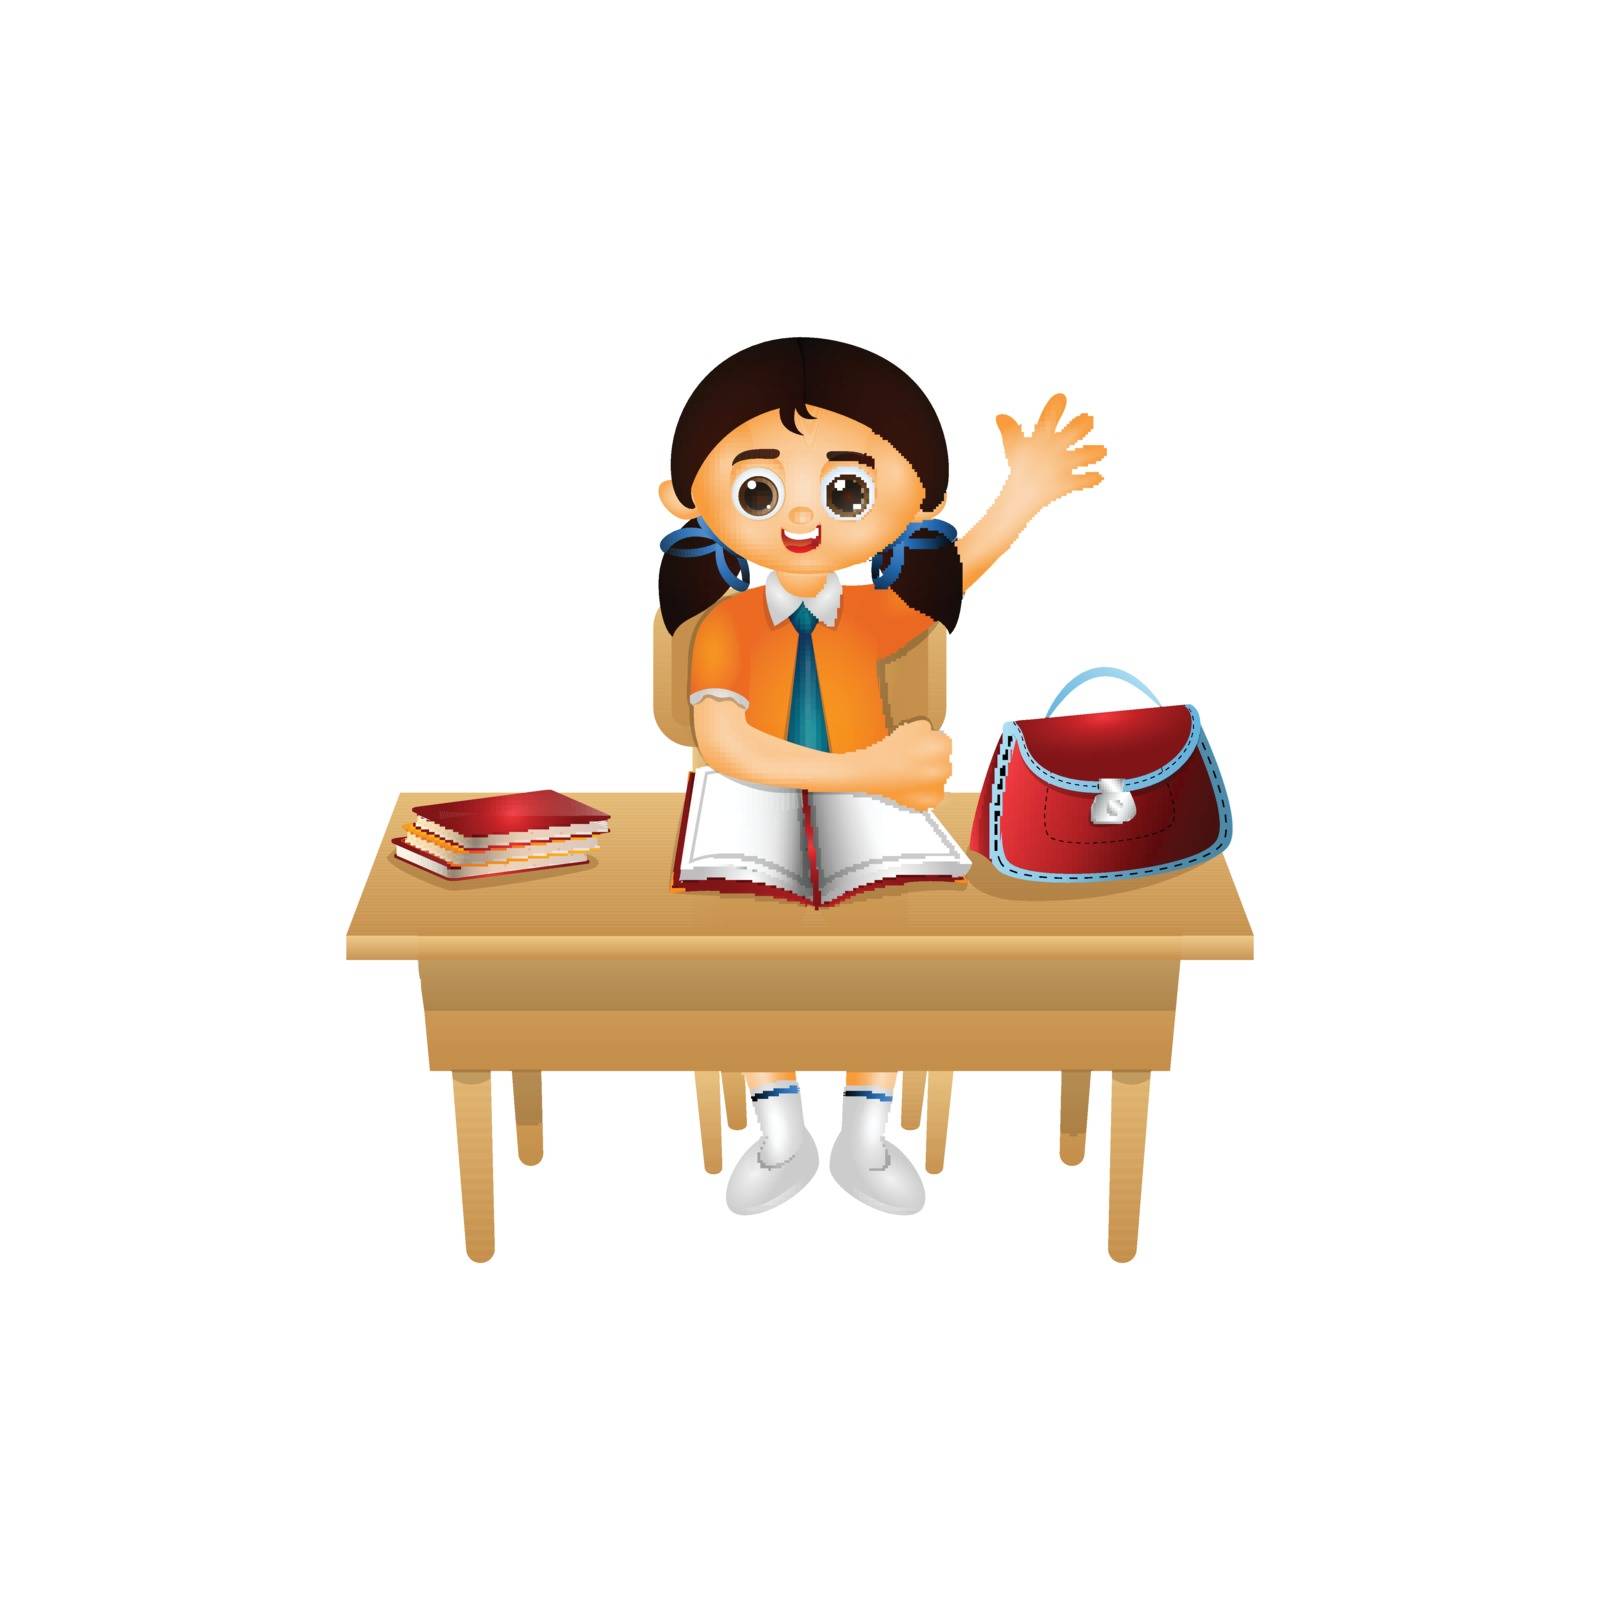 Cartoon character of girl sitting on study table. by aispl